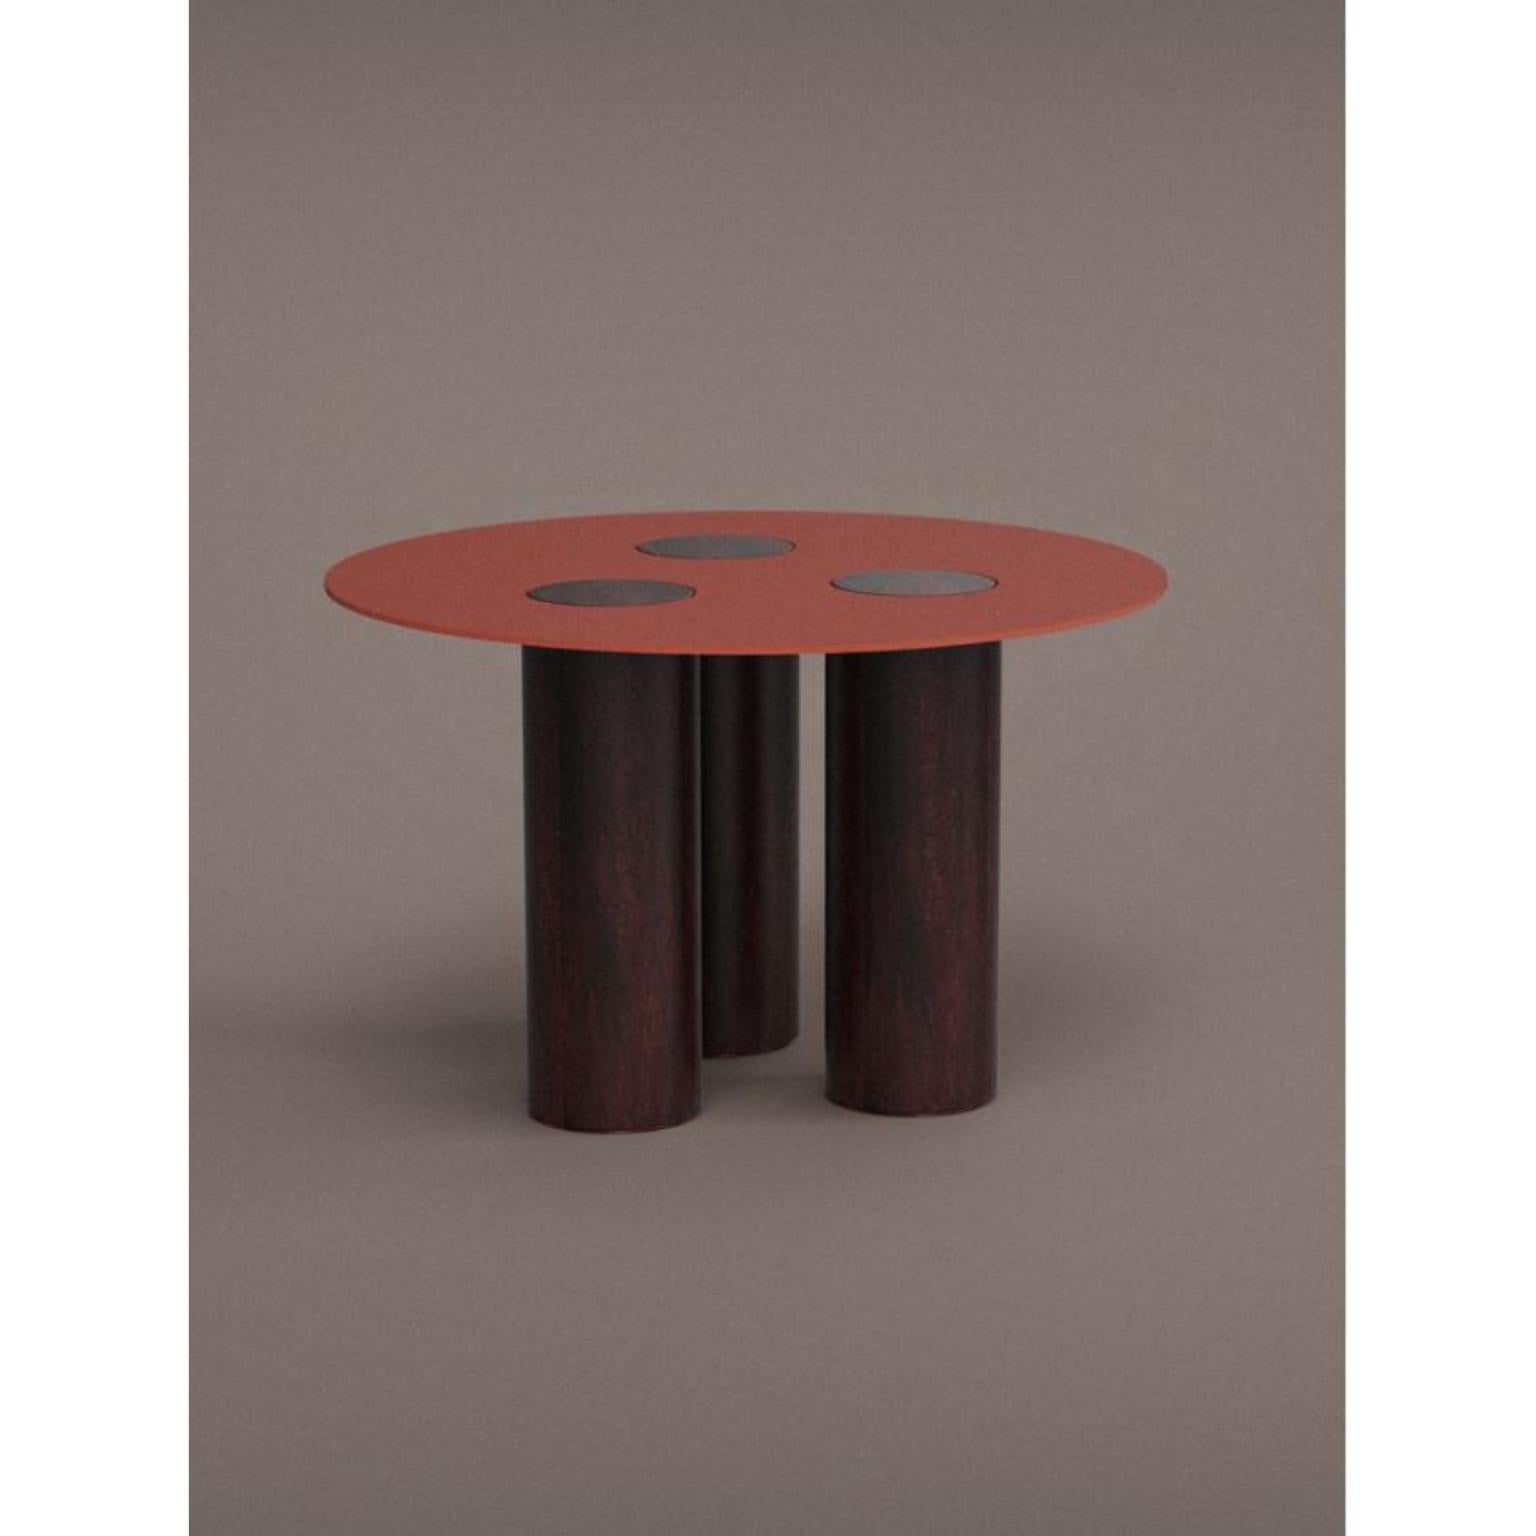 Column Table by WL Ceramics
Designer: David Derksen
Materials: Porcelain
Dimensions: H75 x Ø120 cm

Porcelain cylinders and corten steel plates form the basic elements of this series, with which it is possible to create shelving, side tables, low